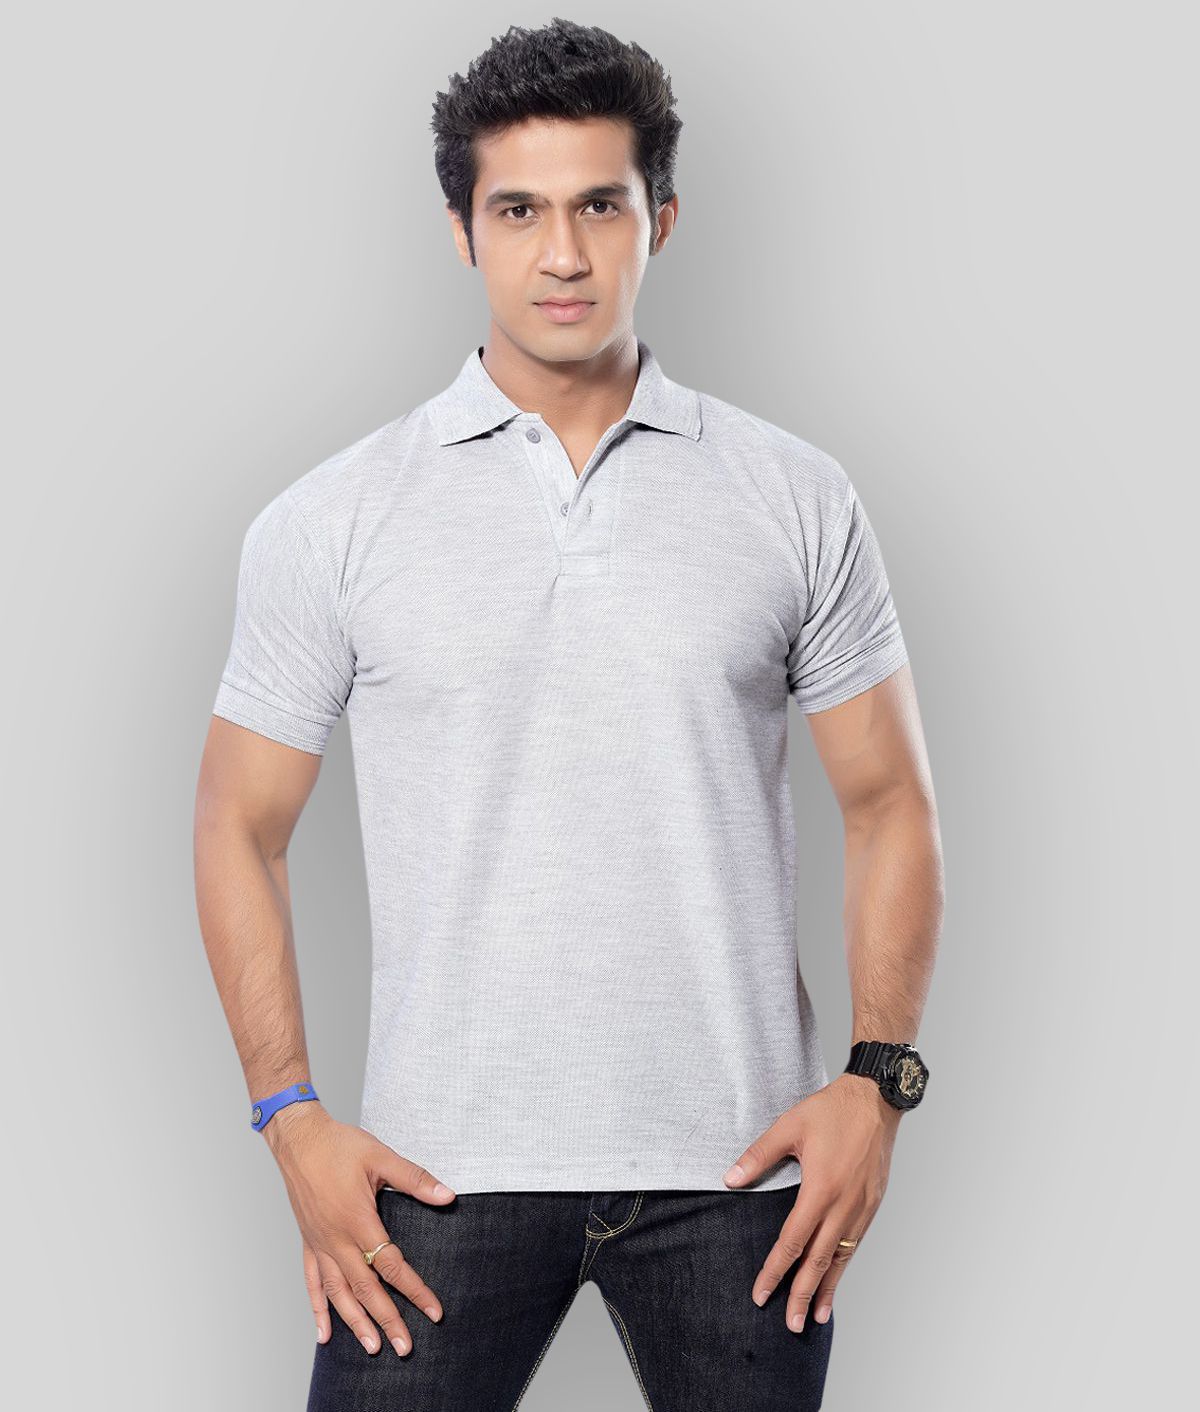     			in365 - Grey Cotton Blend Regular Fit Men's Polo T Shirt ( Pack of 1 )